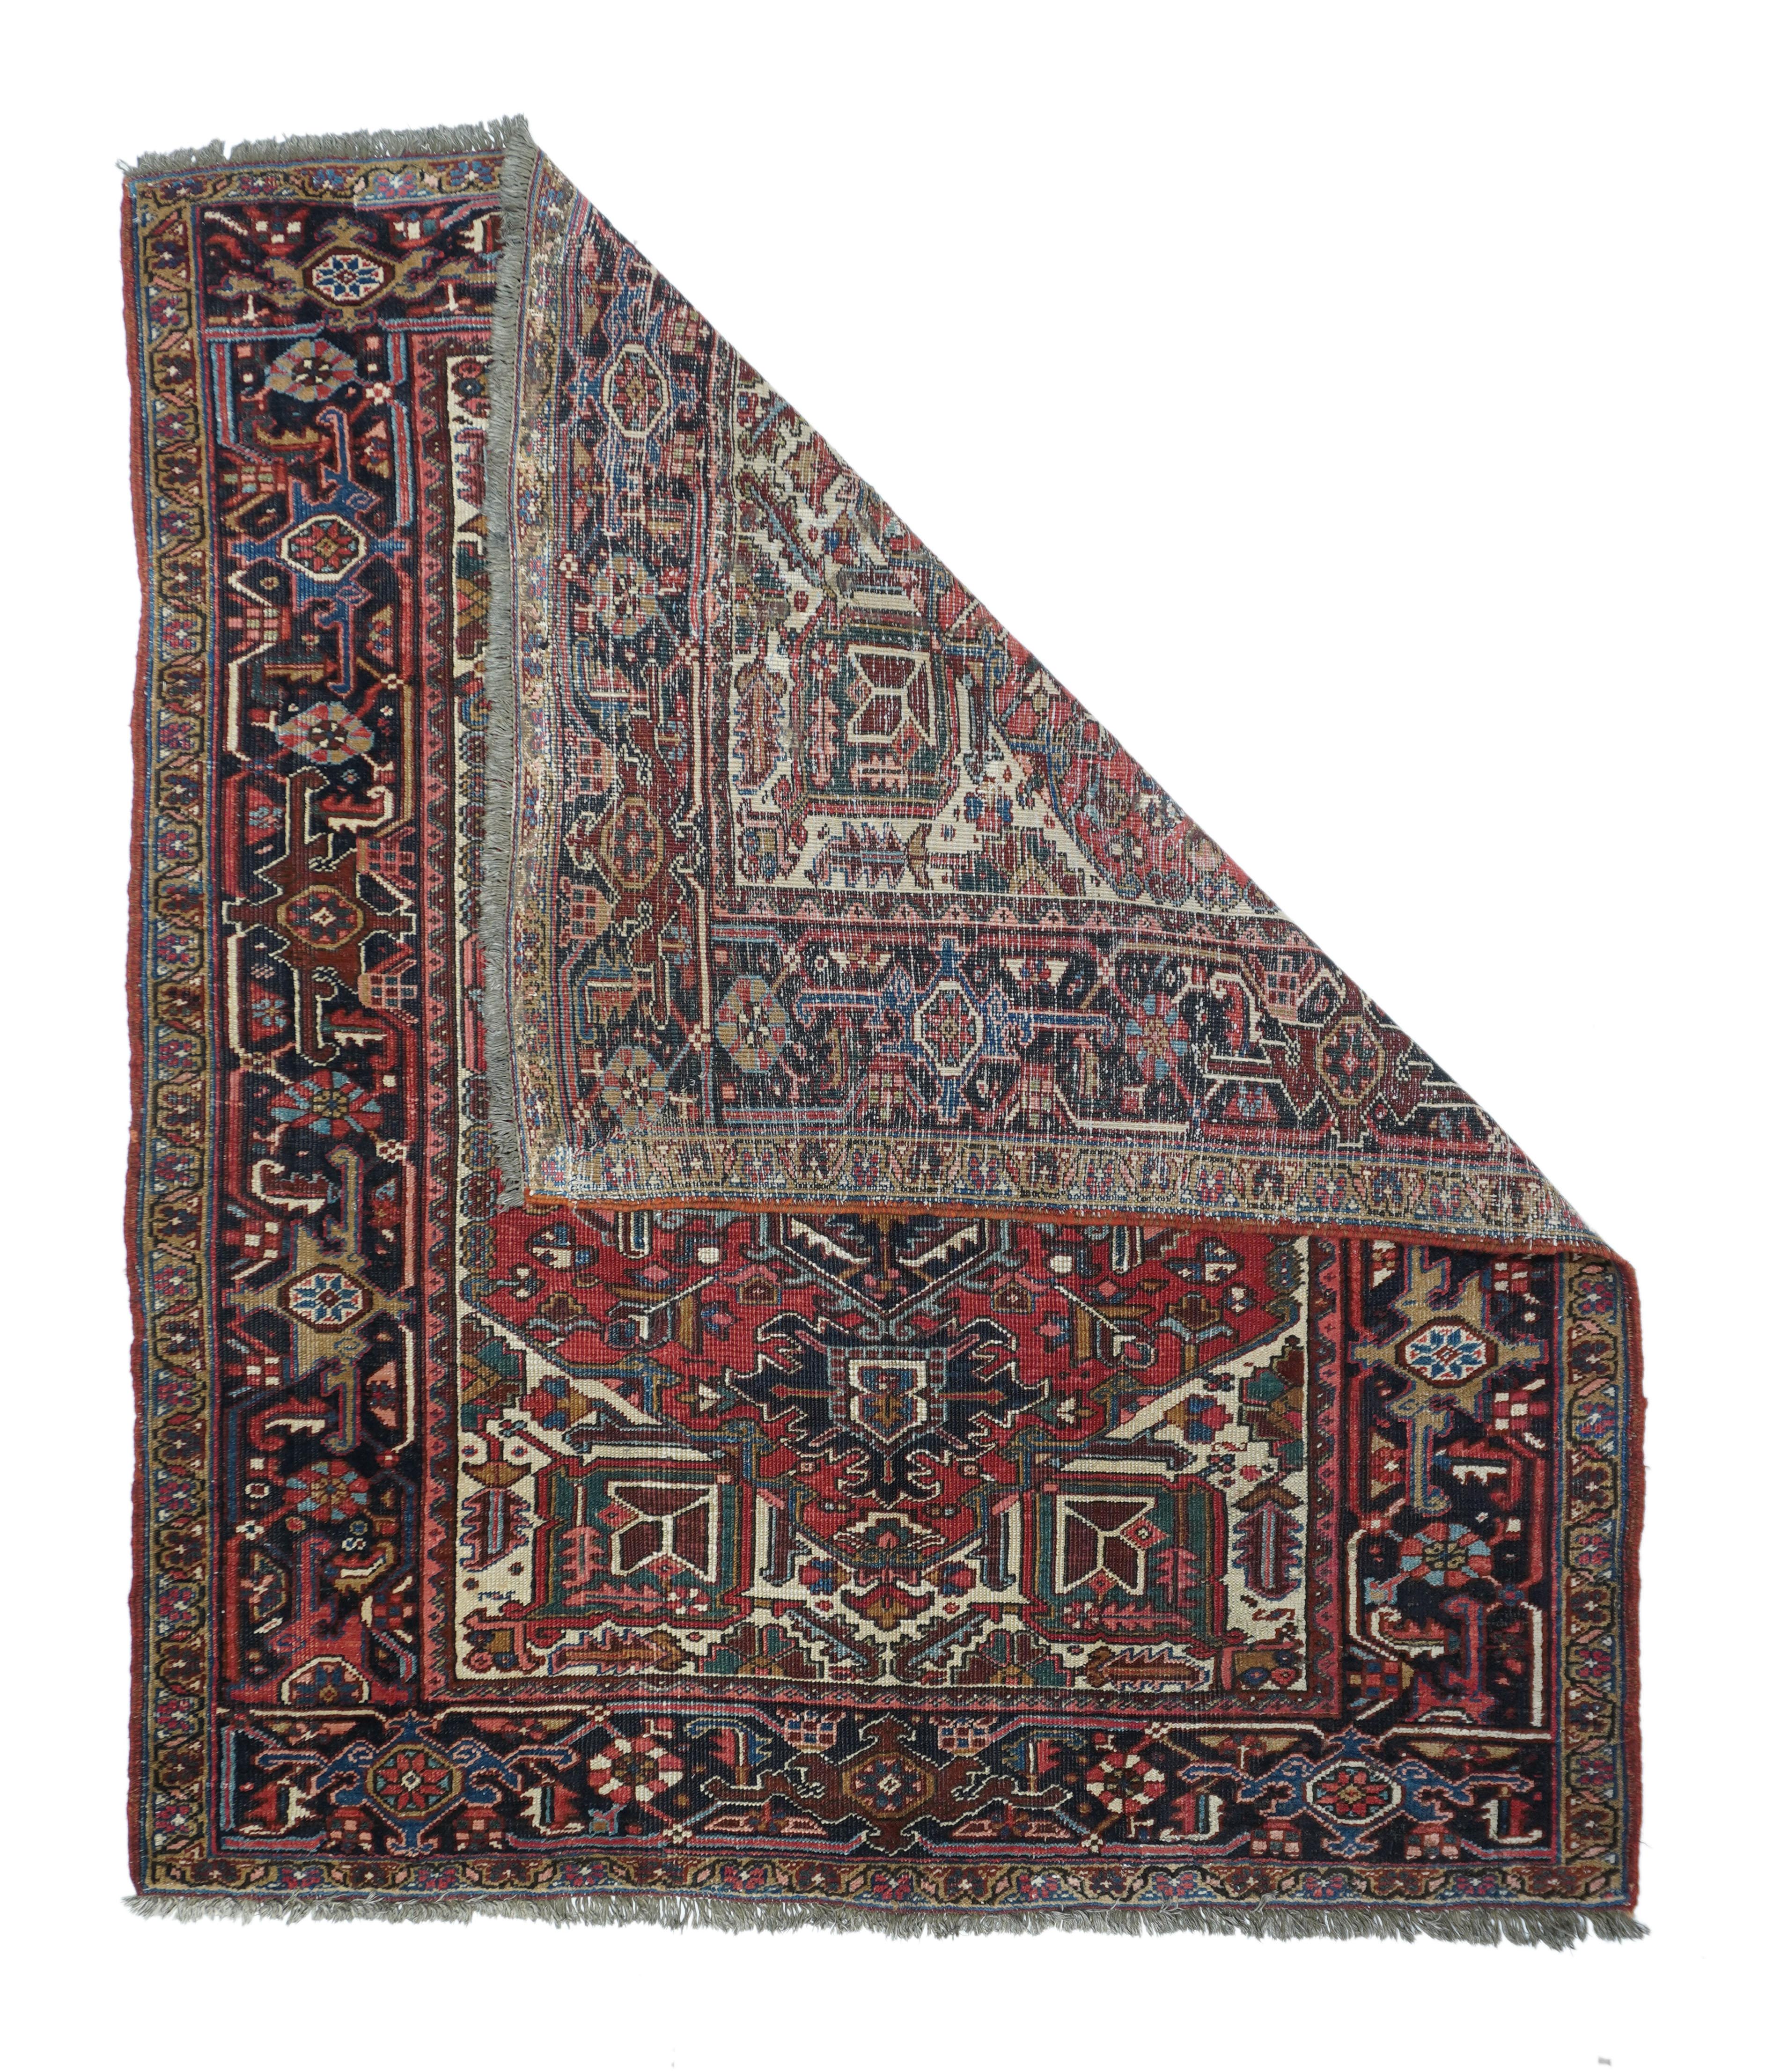 Vintage Heriz Rug 6'3'' x 7'7''. A rare size for this NW Persian rustic type. The ivory field develops into triangular corners, tying into the red subfield with large, squared pendants enclosing flowers. Navy medallion, cream octogramme